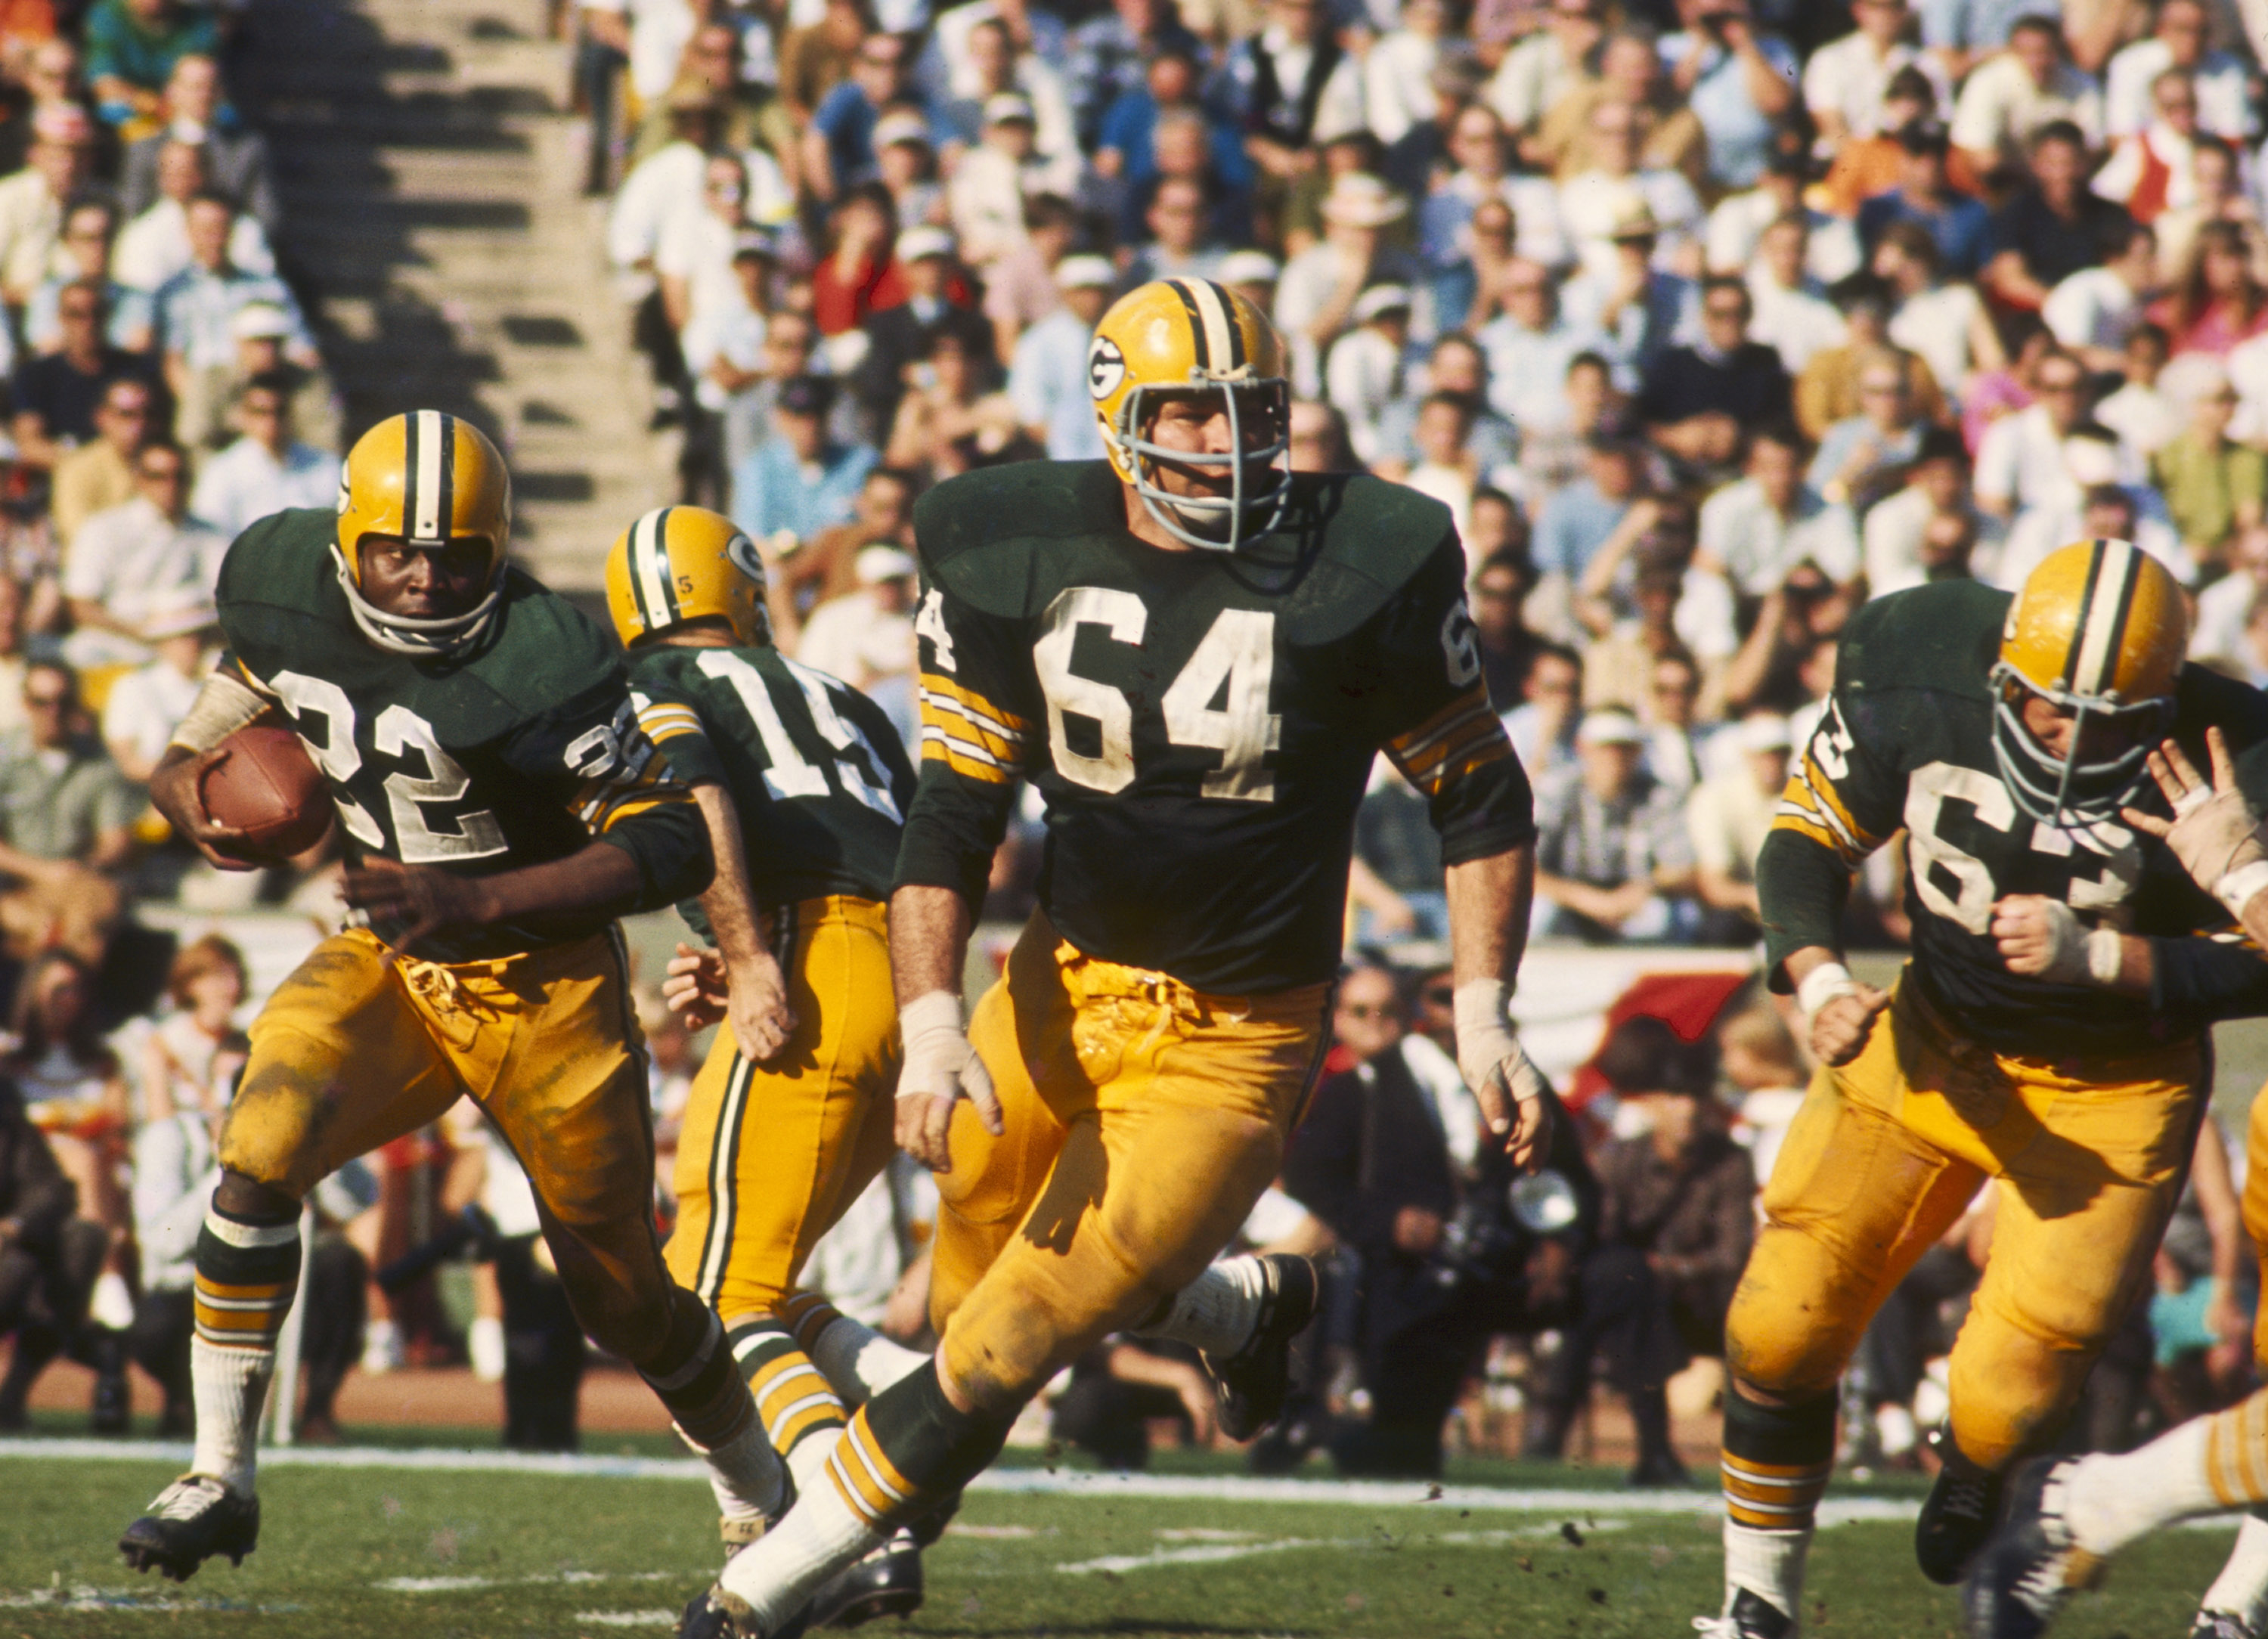 The Green Bay Packers at play